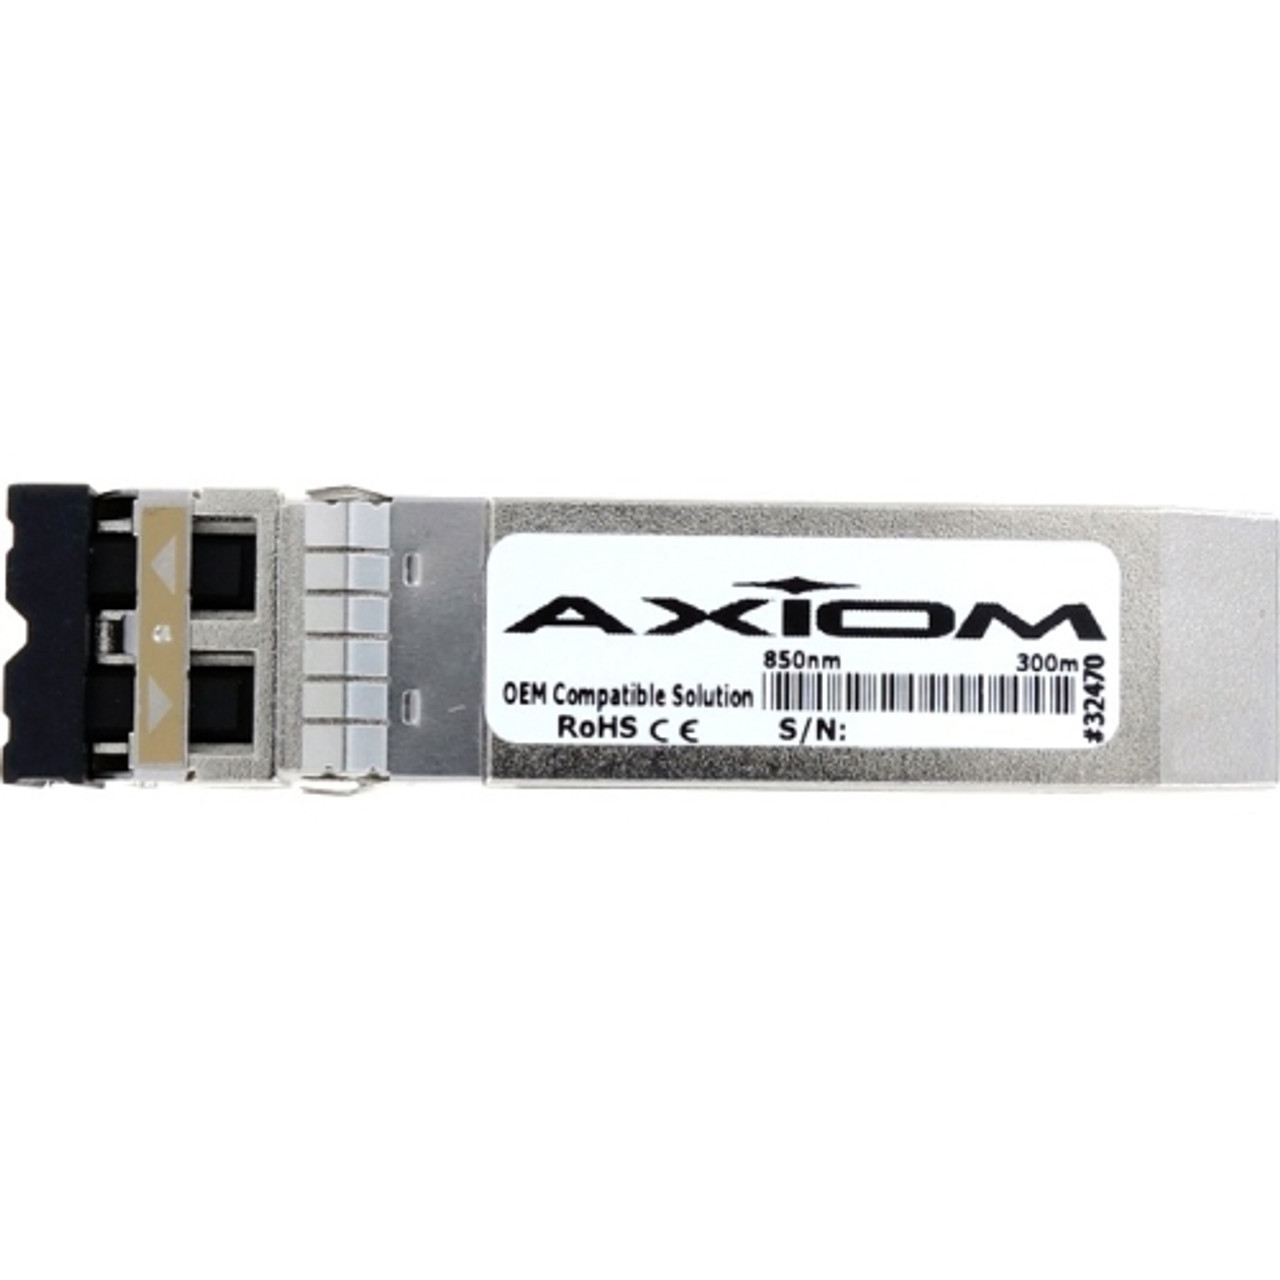 01-SSC-9785-AX Axiom 10Gbps 10GBase-SR Multi-mode Fiber 300m 850nm Duplex LC Connector SFP+ Transceiver Module for SonicWall Compatible